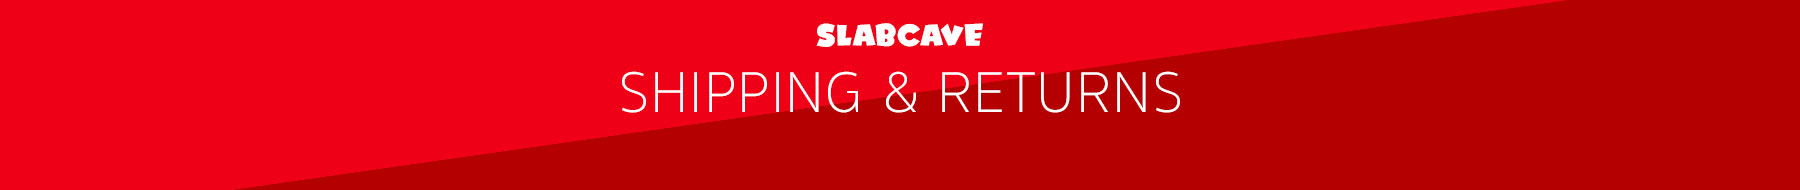 SlabCave Privacy Policy Banner